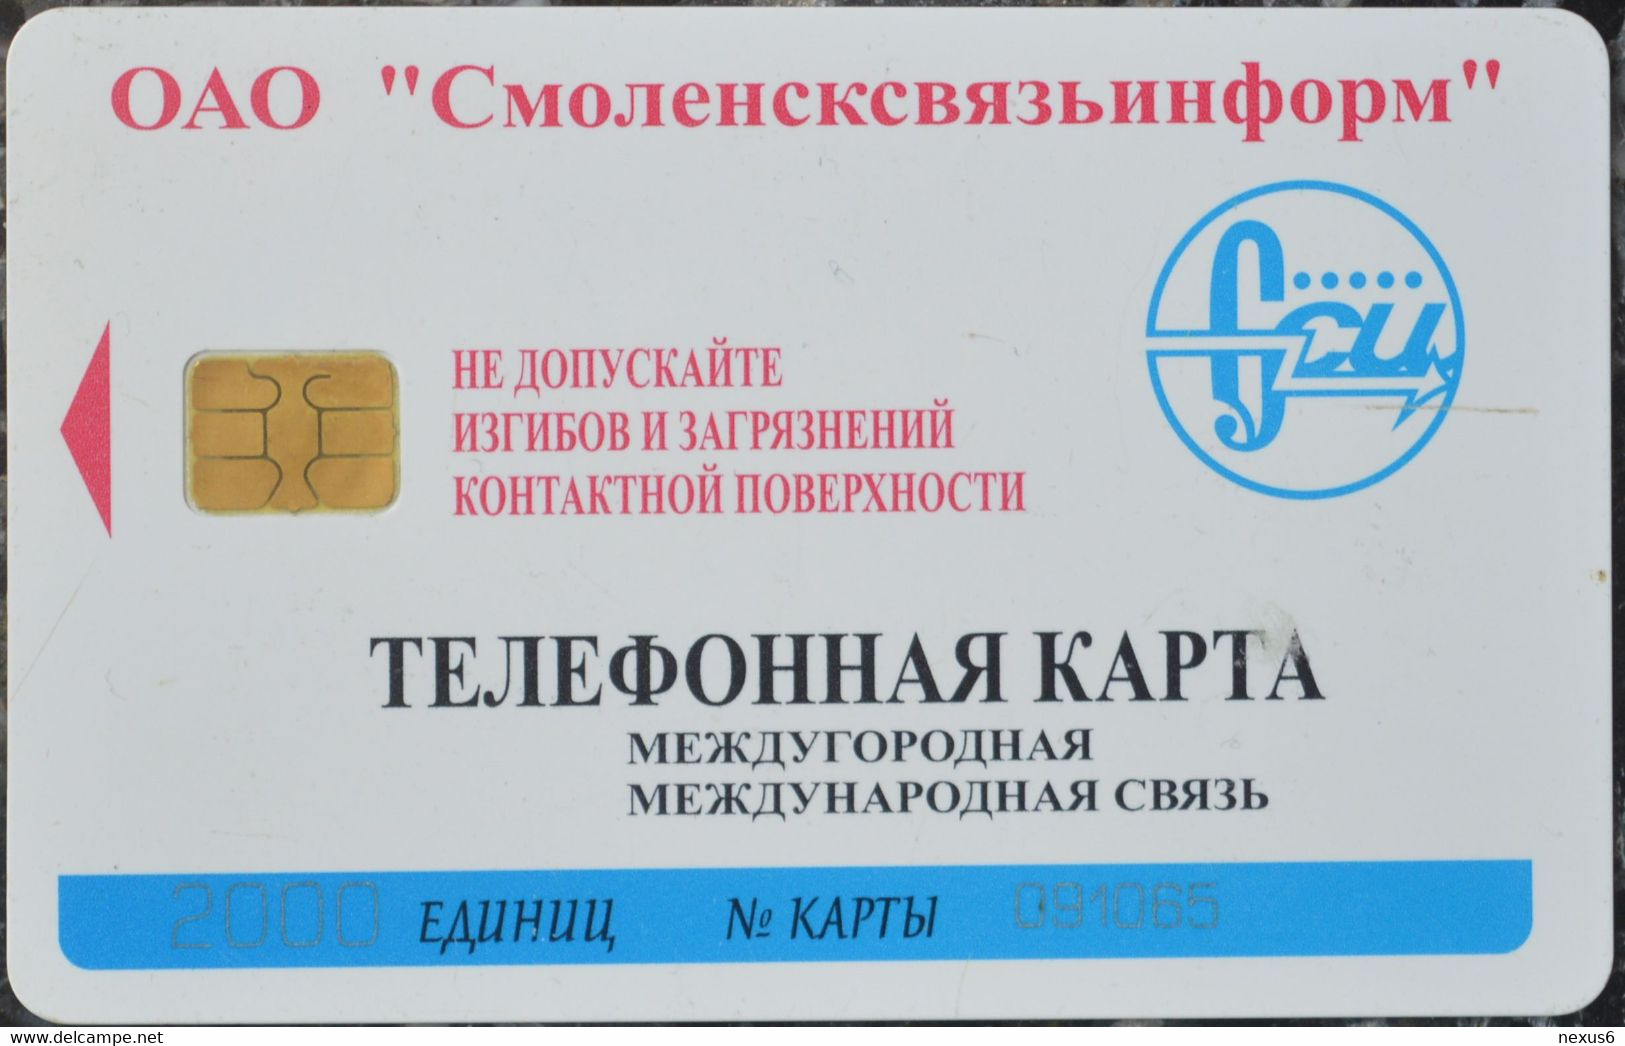 Russia - Smolensk - OAO - Logo (Cn. And FV On Blue Stripe Normal 0), Chip Siemens S35,  Issue 2001, 2.000U, Used - Russia